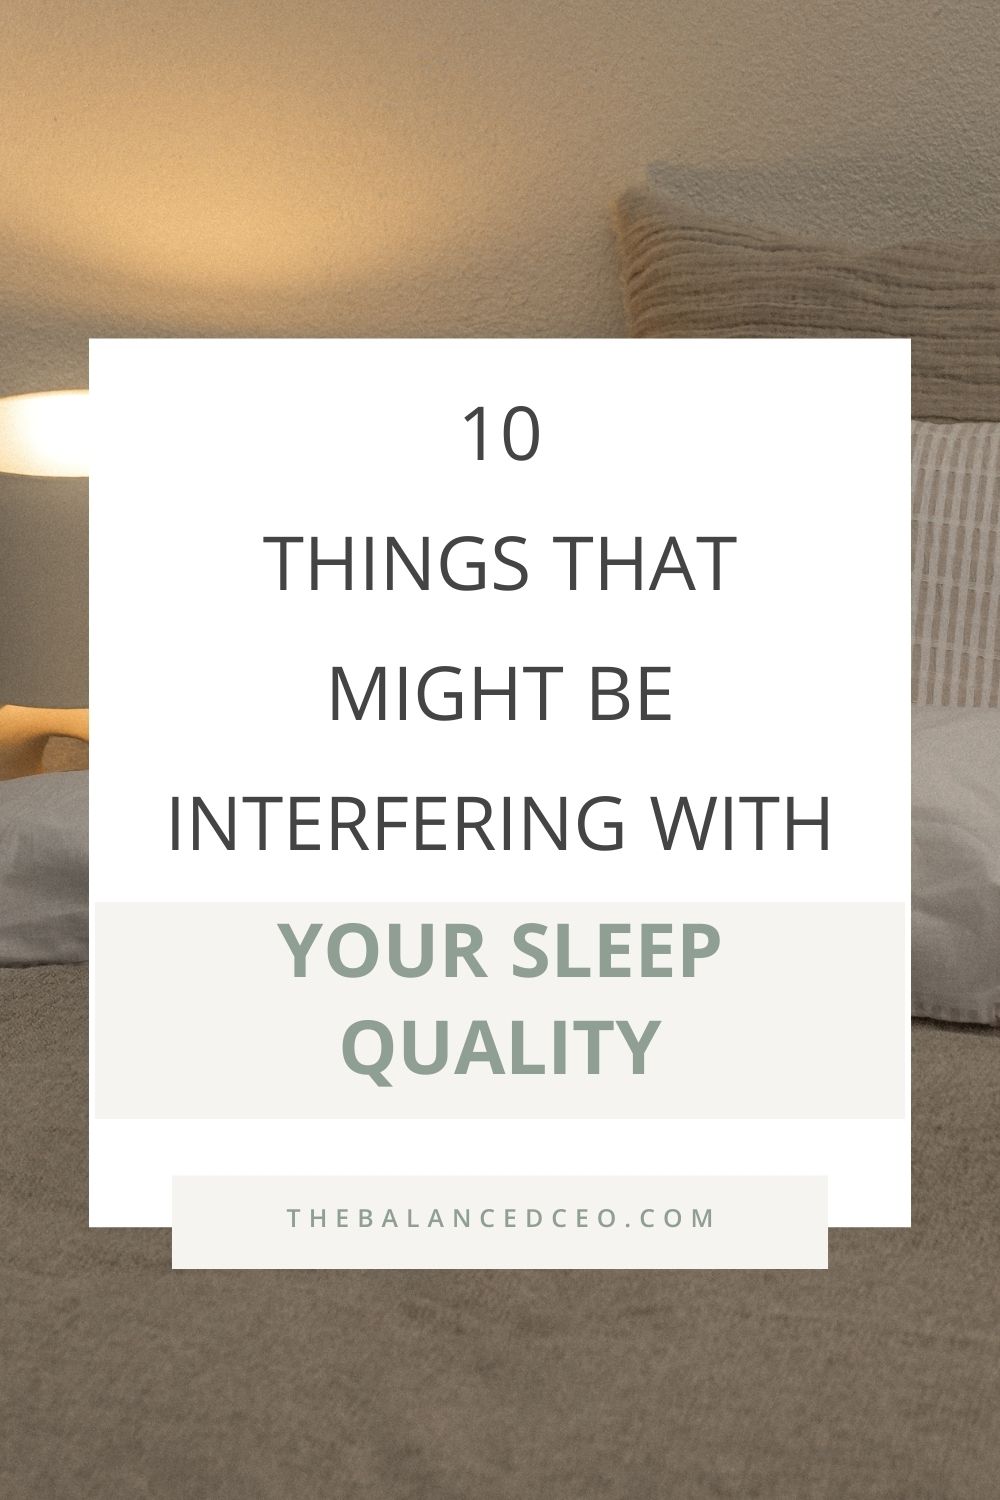 10 Things That Might Be Interfering With Your Sleep Quality